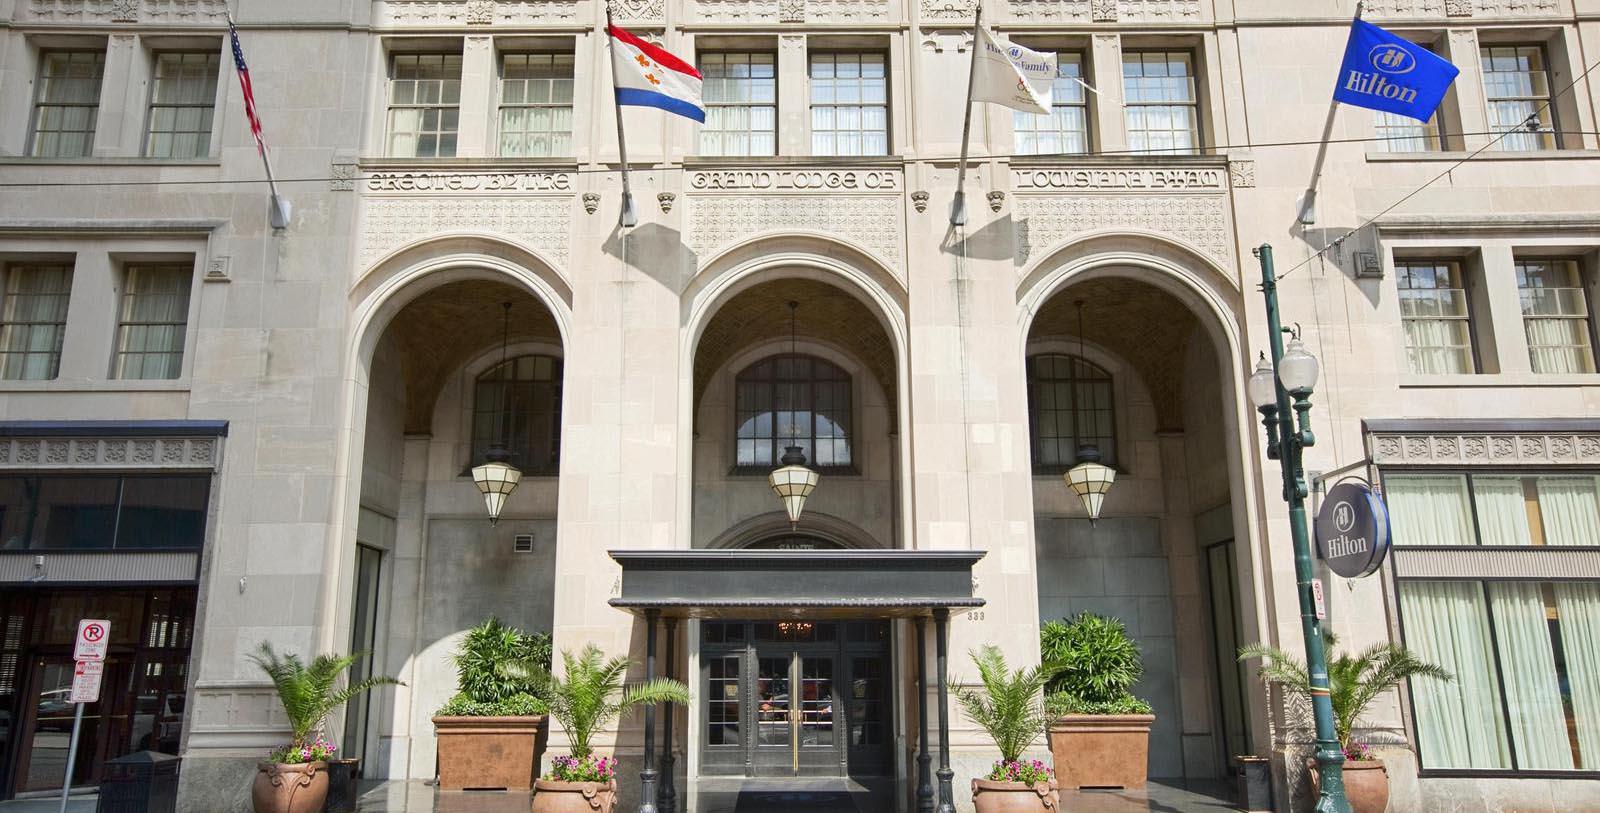 Image of hotel exterior entrance Hilton New Orleans/St. Charles Avenue, 1926, Member of Historic Hotels of America, in New Orleans, Louisiana, Special Offers, Discounted Rates, Families, Romantic Escape, Honeymoons, Anniversaries, Reunions